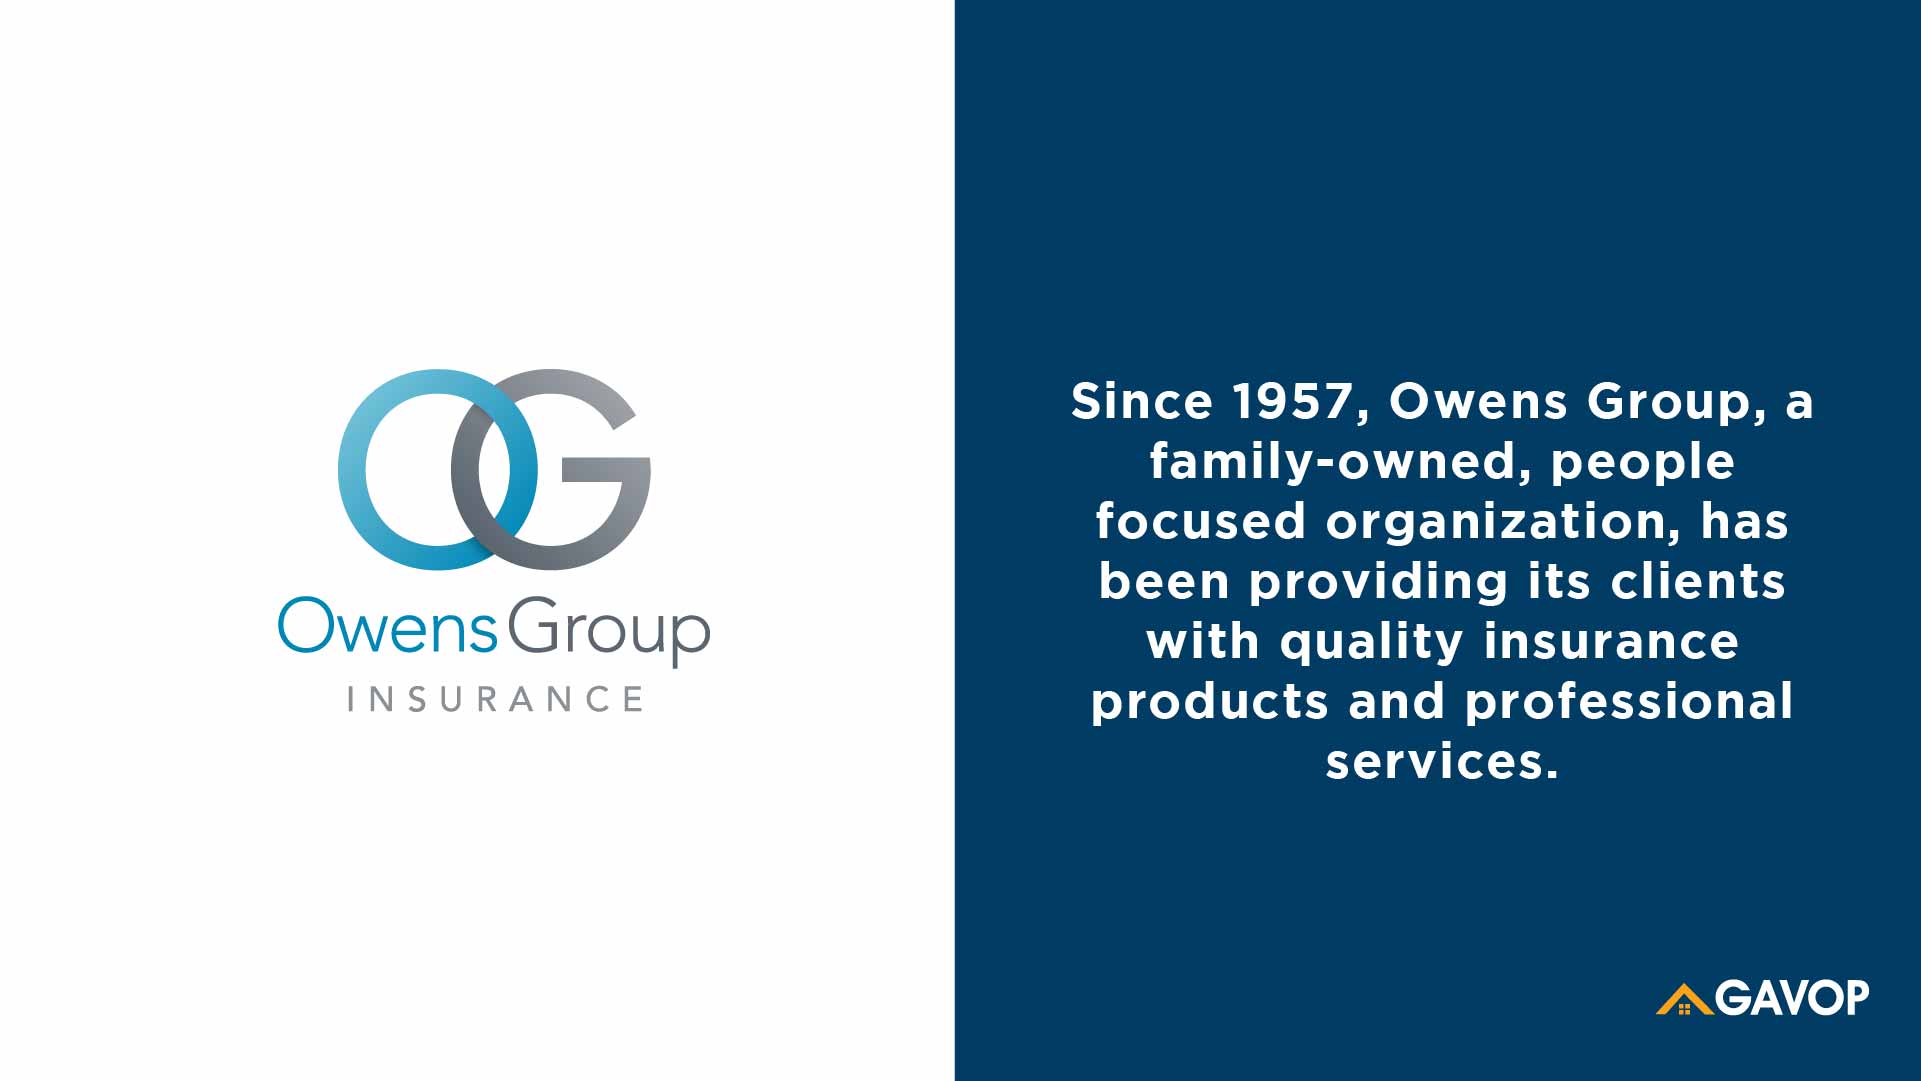 Owens Group